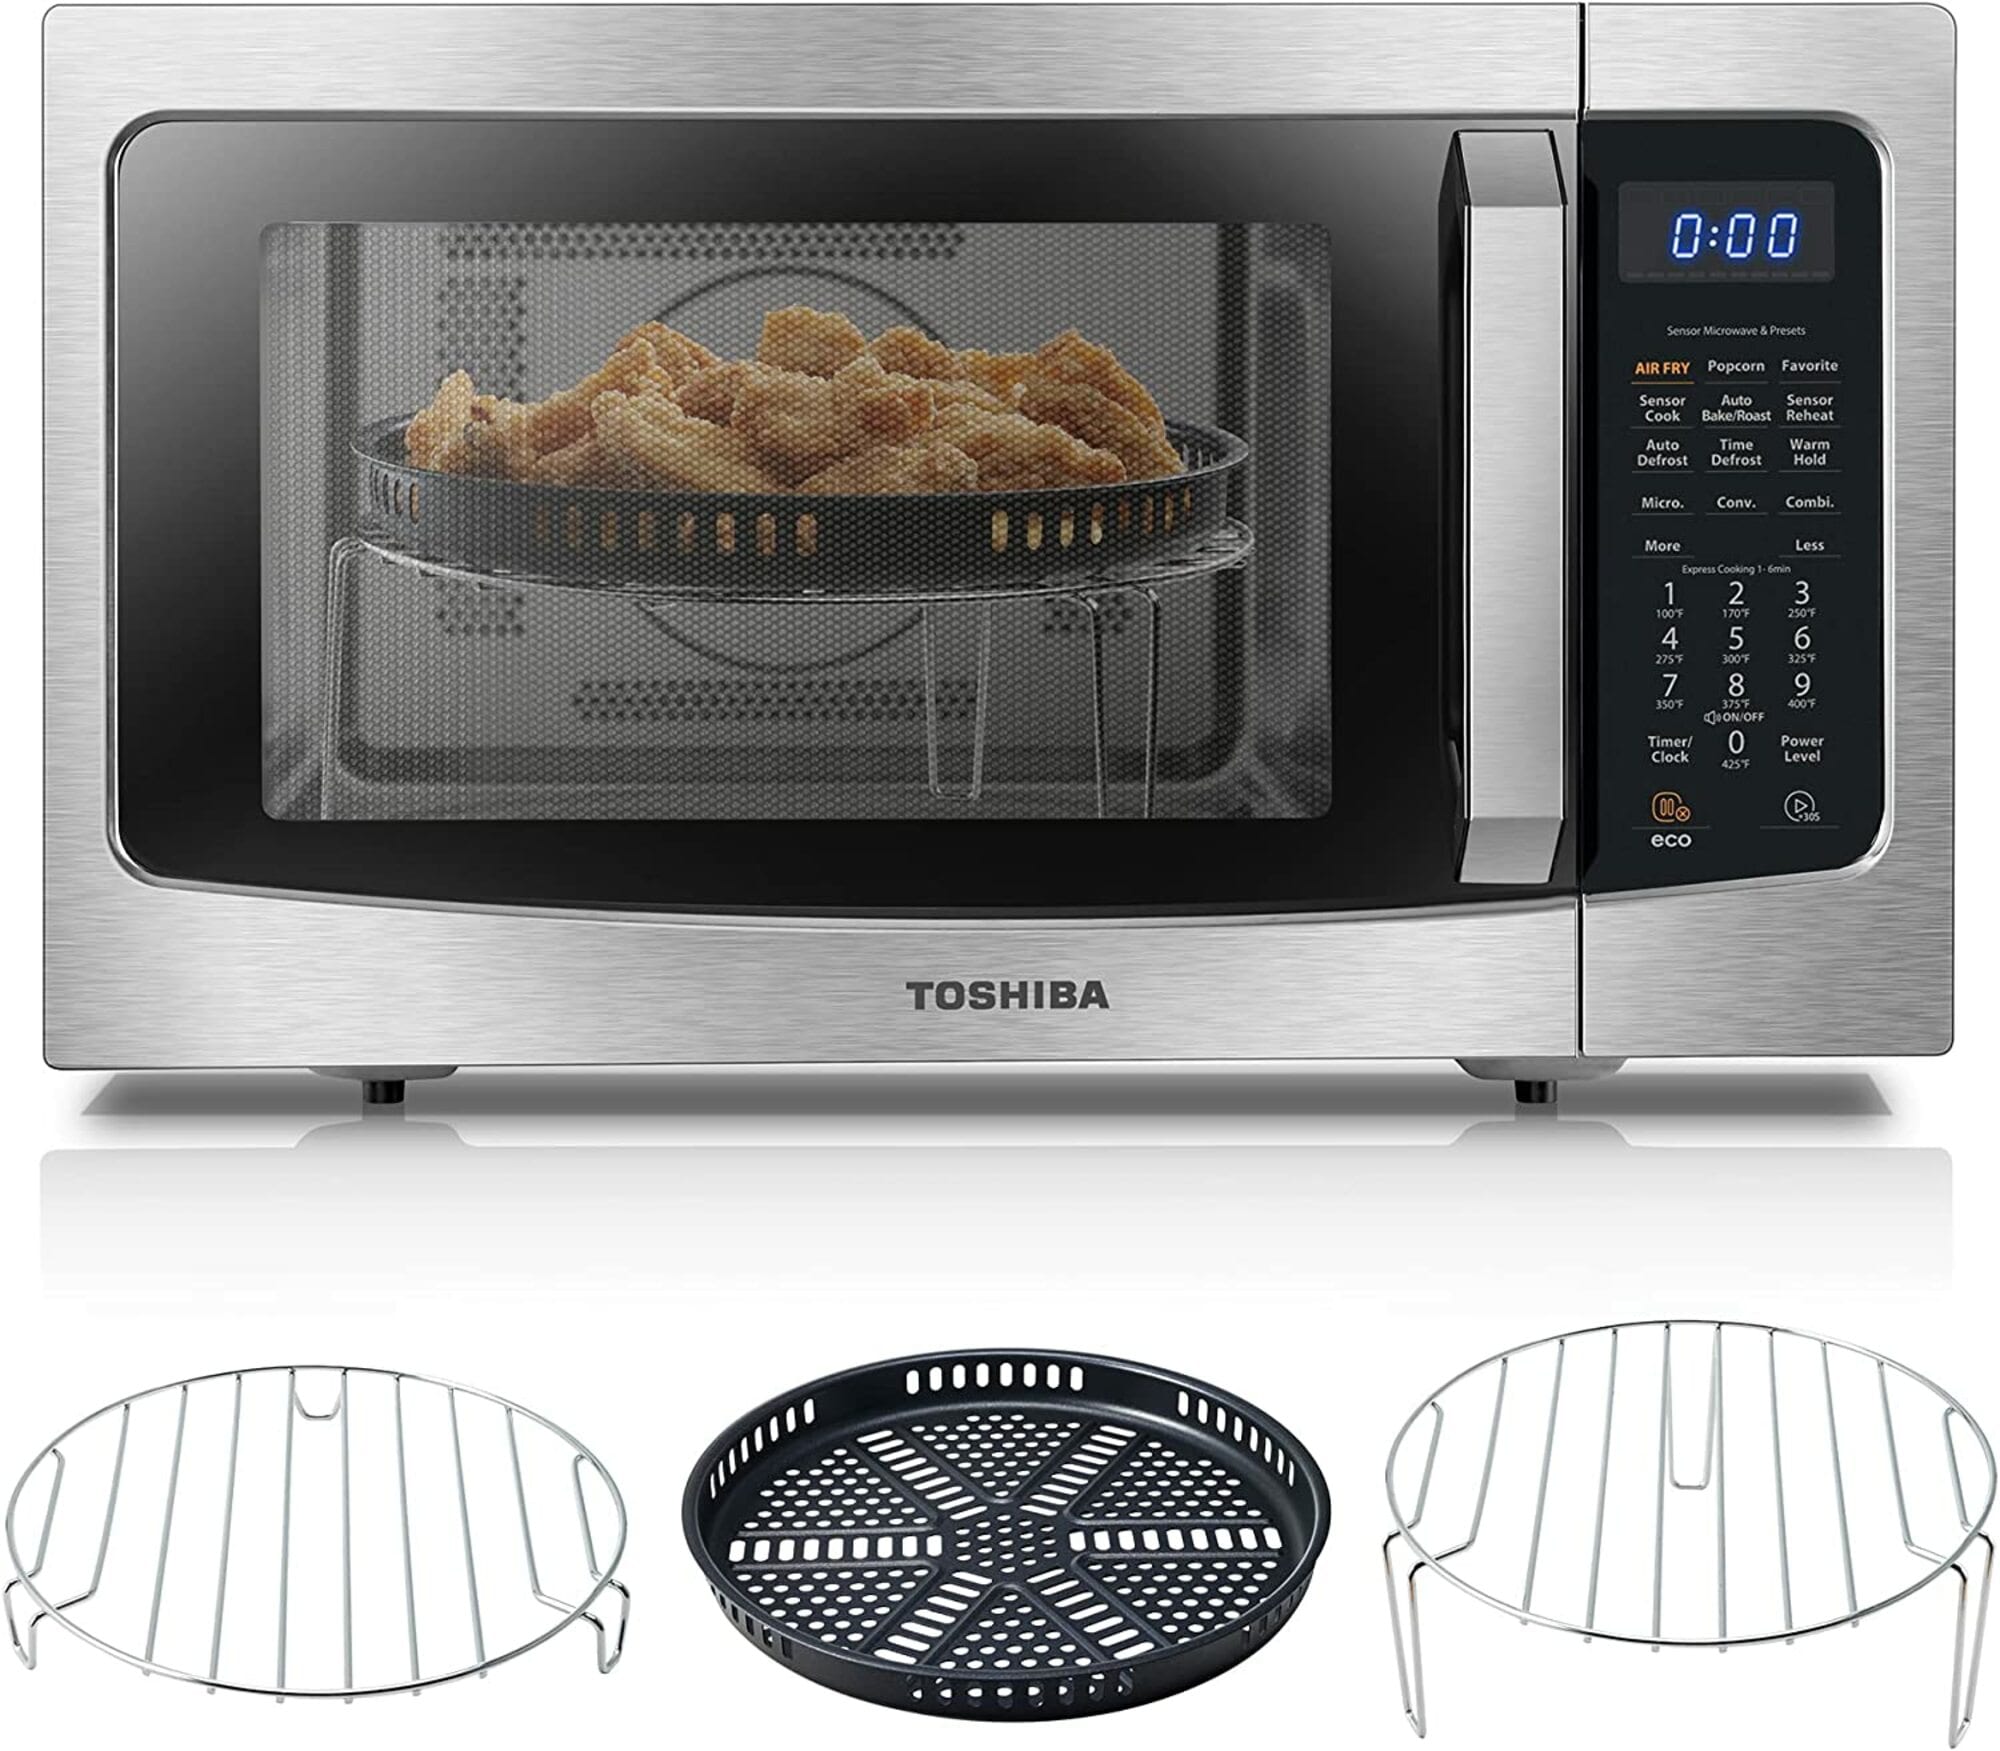 TOSHIBA 7-in-1 Countertop Microwave Oven Air Fryer Combo, Inverter